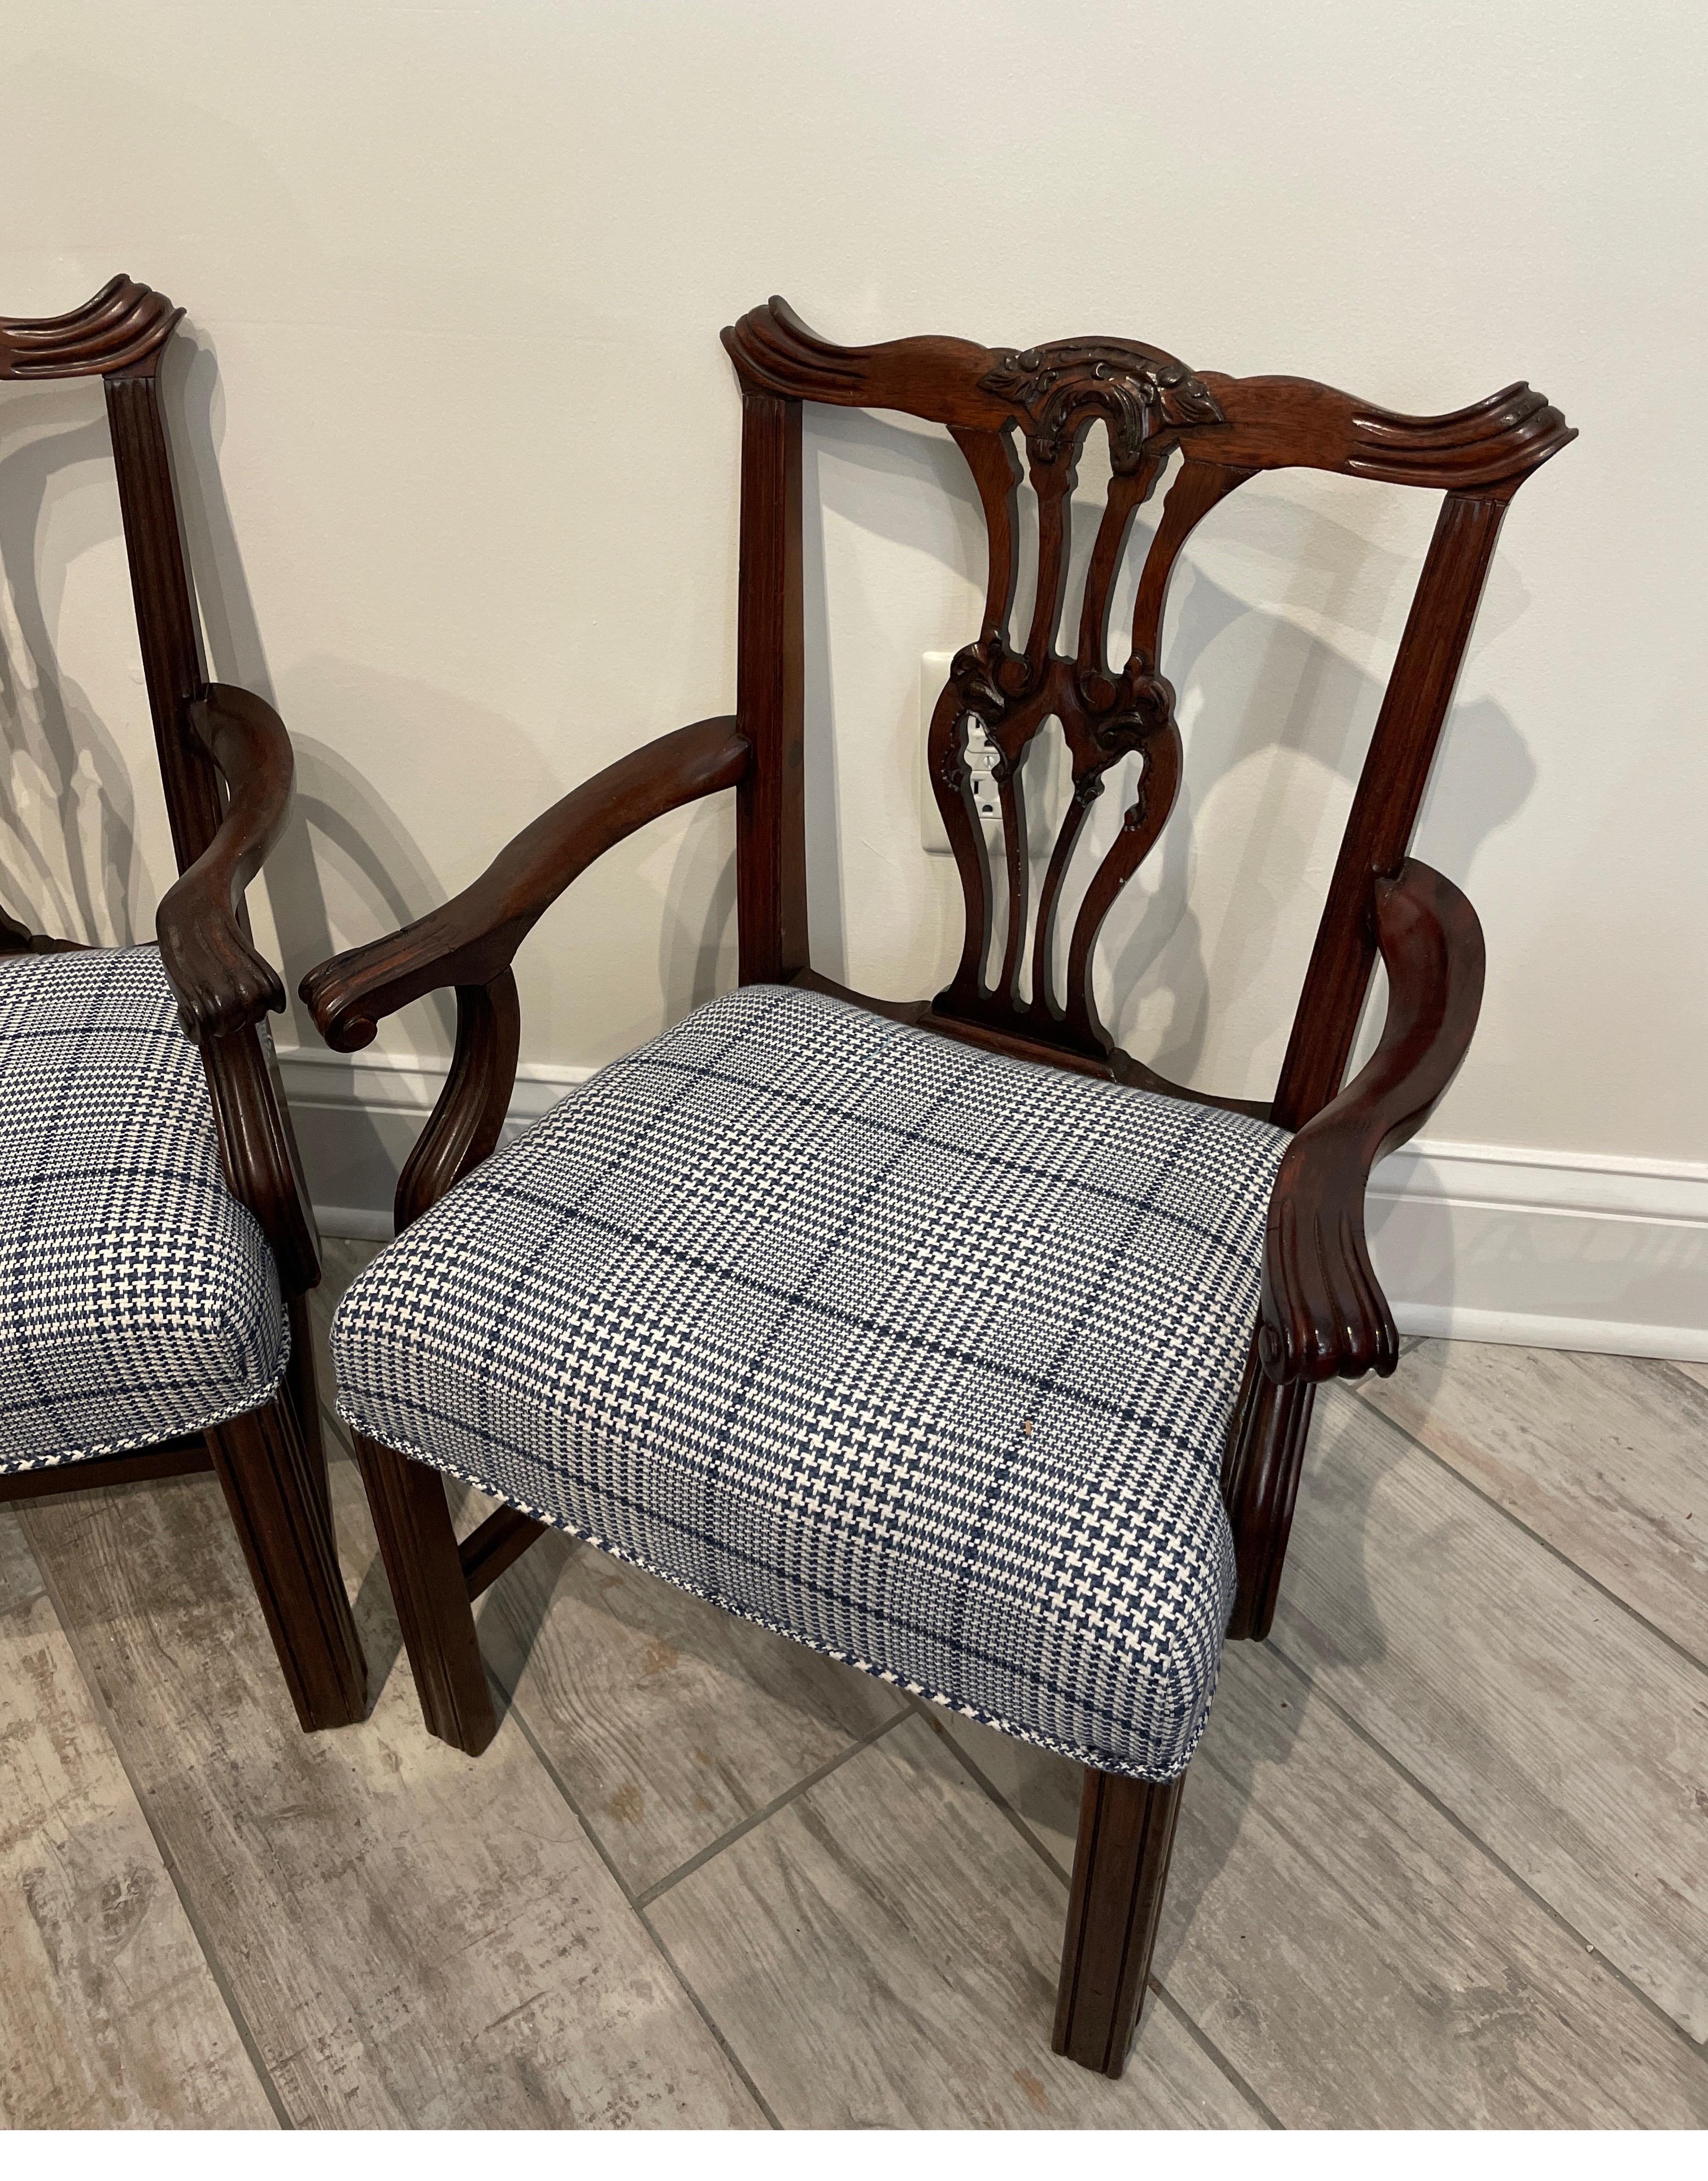 A wonderful pair of miniature Chinese Chippendale armchairs newly upholstered in blue & white glen plaid fabric. A truly fabulous example of miniature chairs. Use them anywhere to cause a stir.